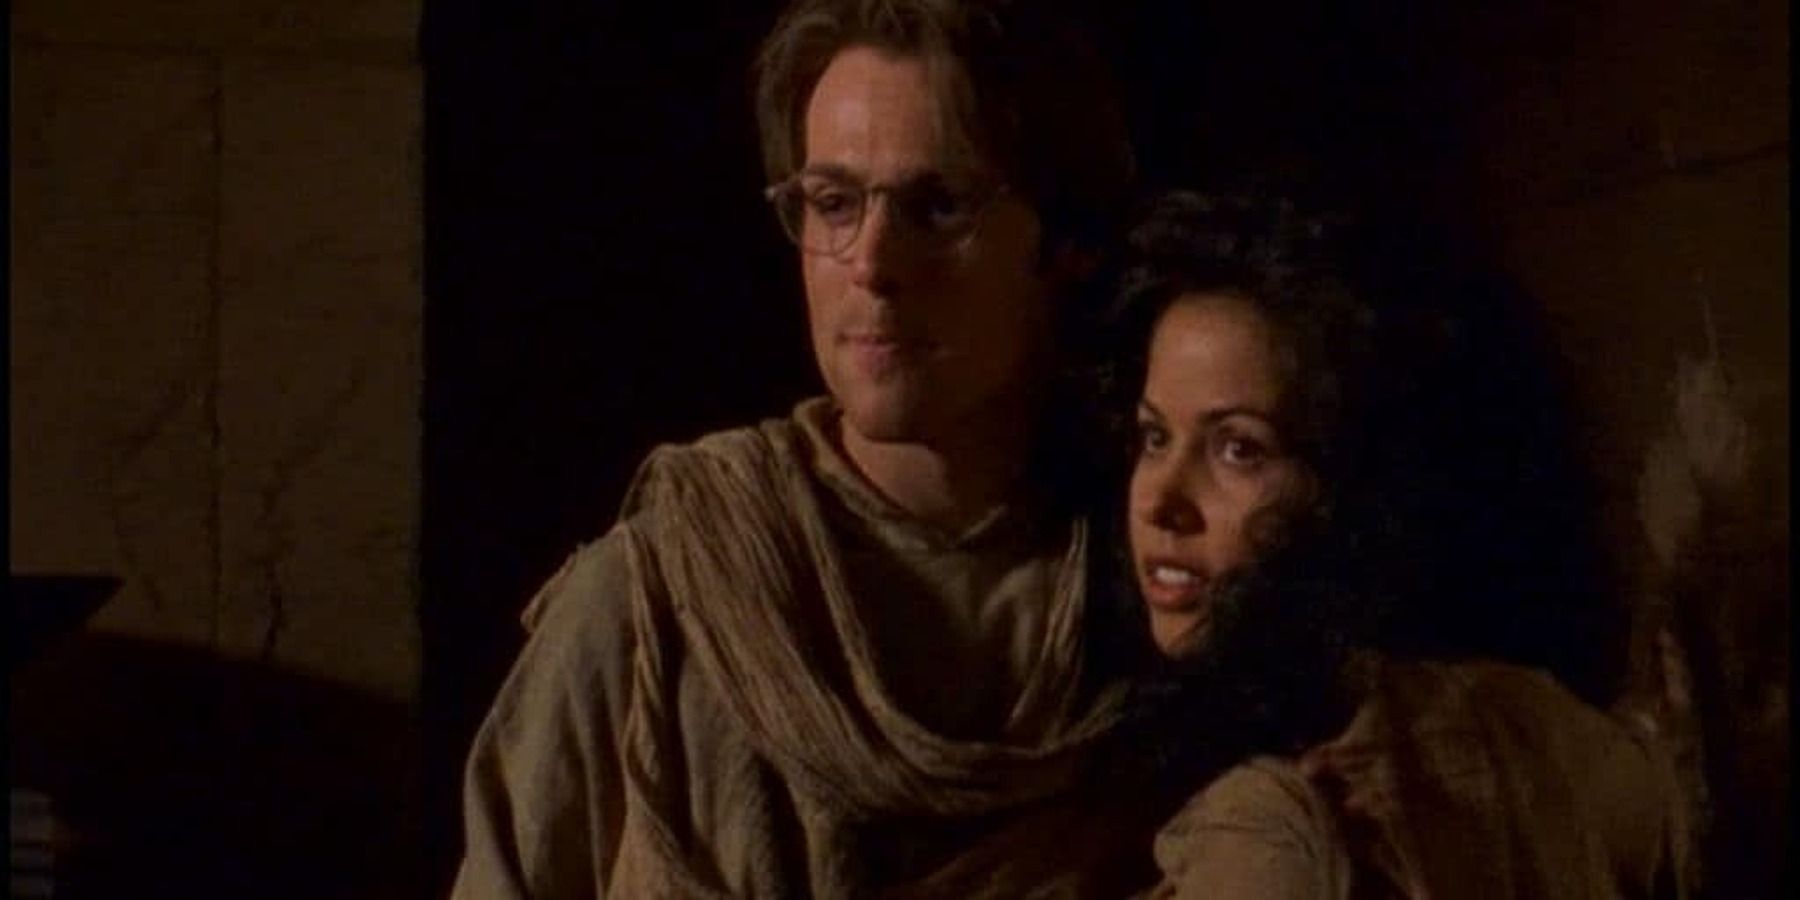 stargate sg-1: exploring the wasted potential of sha're3